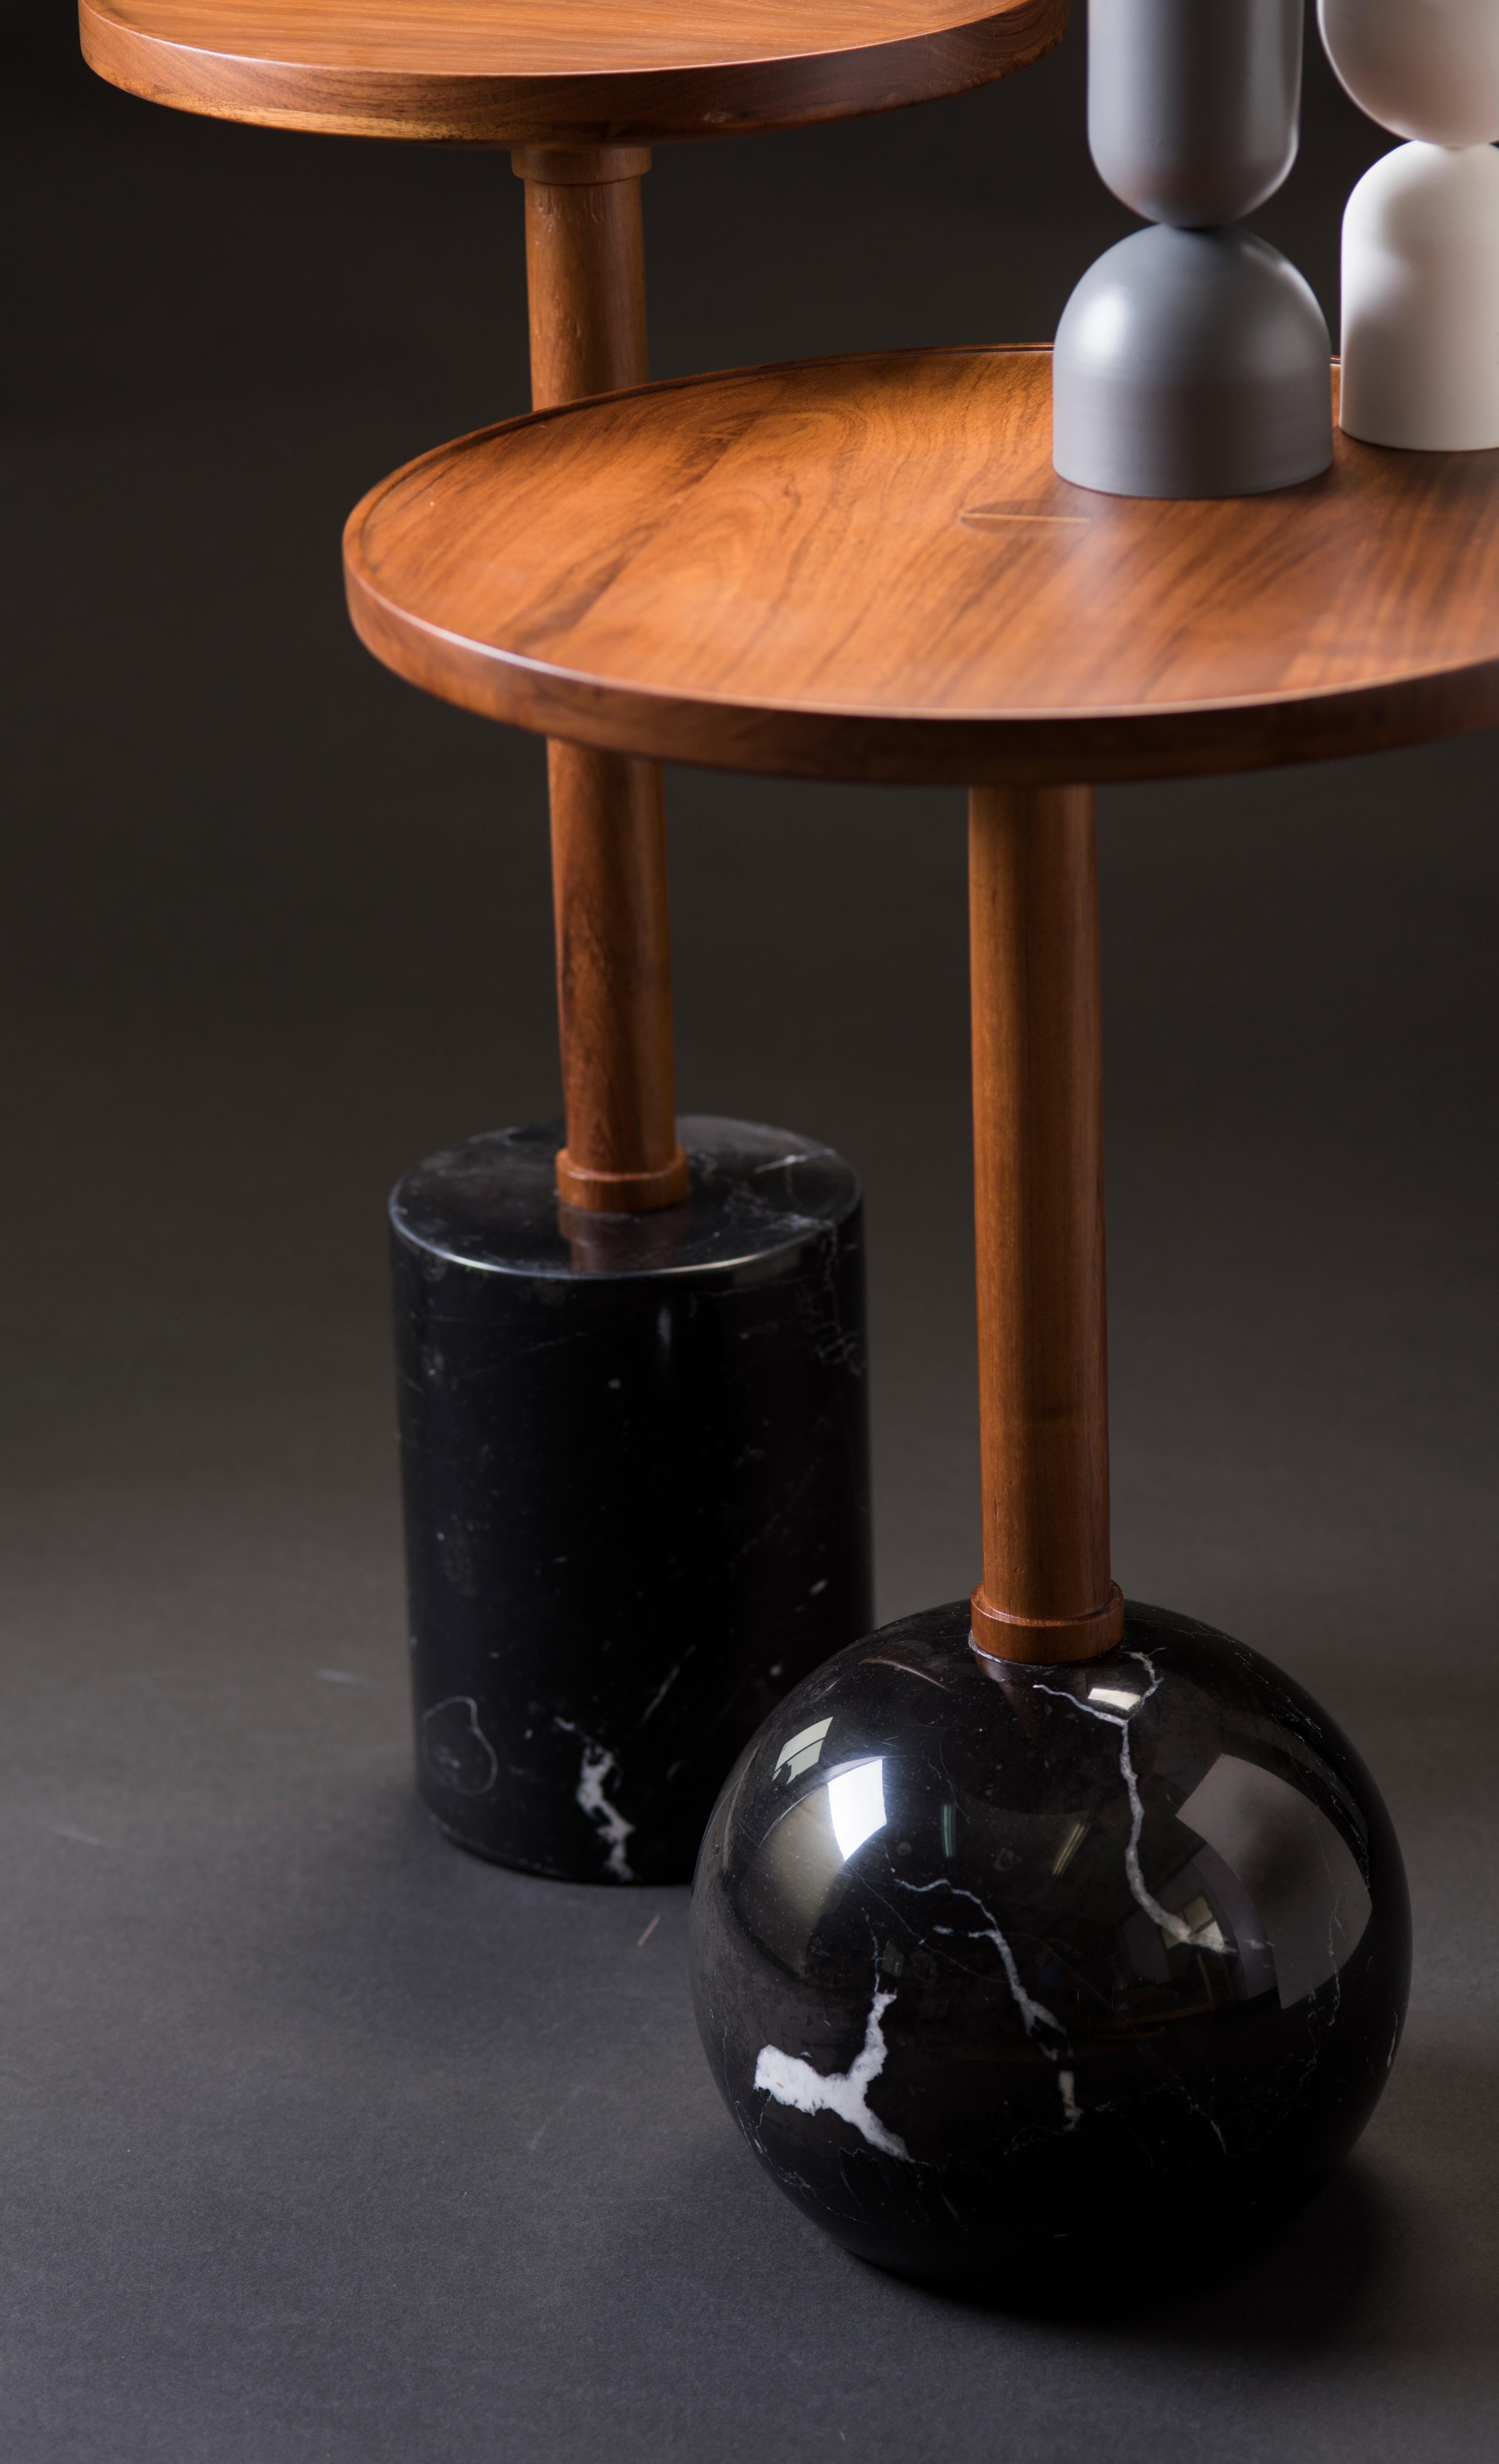 Honoring the process of craftsmanship, geometry makes poetry in the Mesa Monterrey. The table is turned by hand; the base is made of a marble sphere, the top is made of solid tzalam wood. With strength, resistance, and honesty in the raw materials